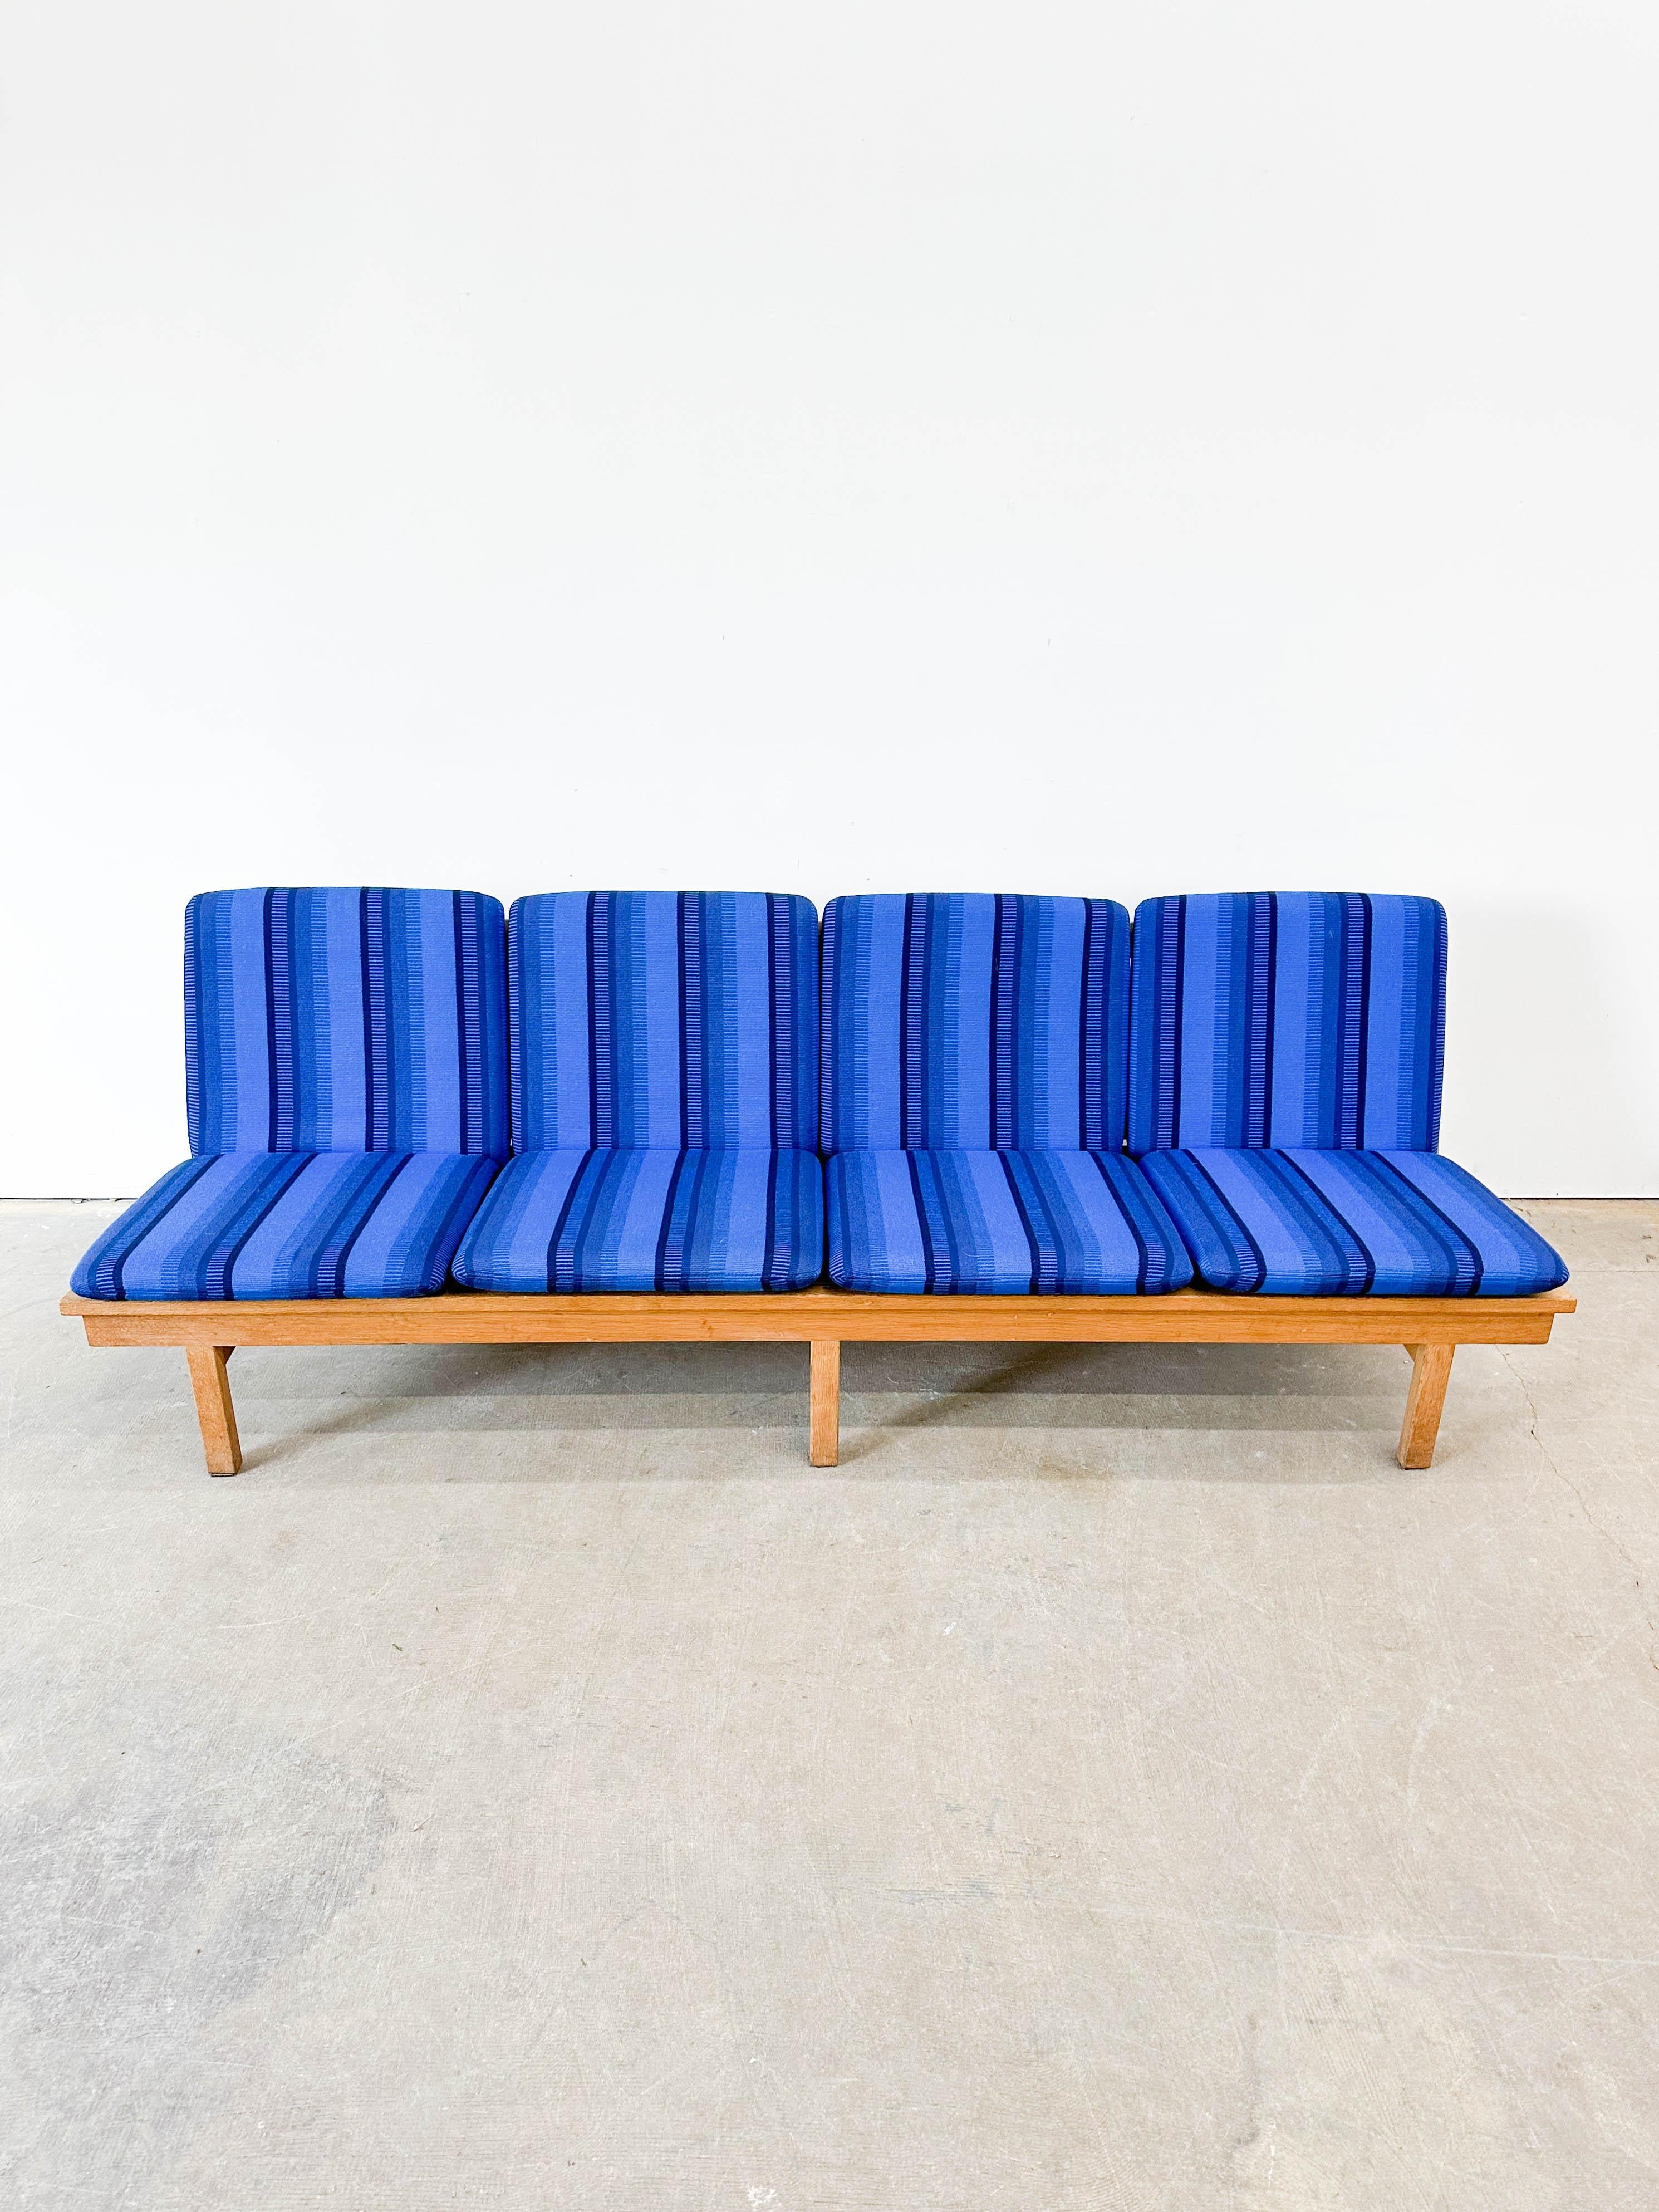 Superb four seat solid oak sofa model 2219 from Danish designer Borge Mogensen. Made by Fredericia Stolefabrik in the 1960s, this example has fantastic original wool cushion covers in a classic Scandinavian stripe pattern. The sofa frame looks great